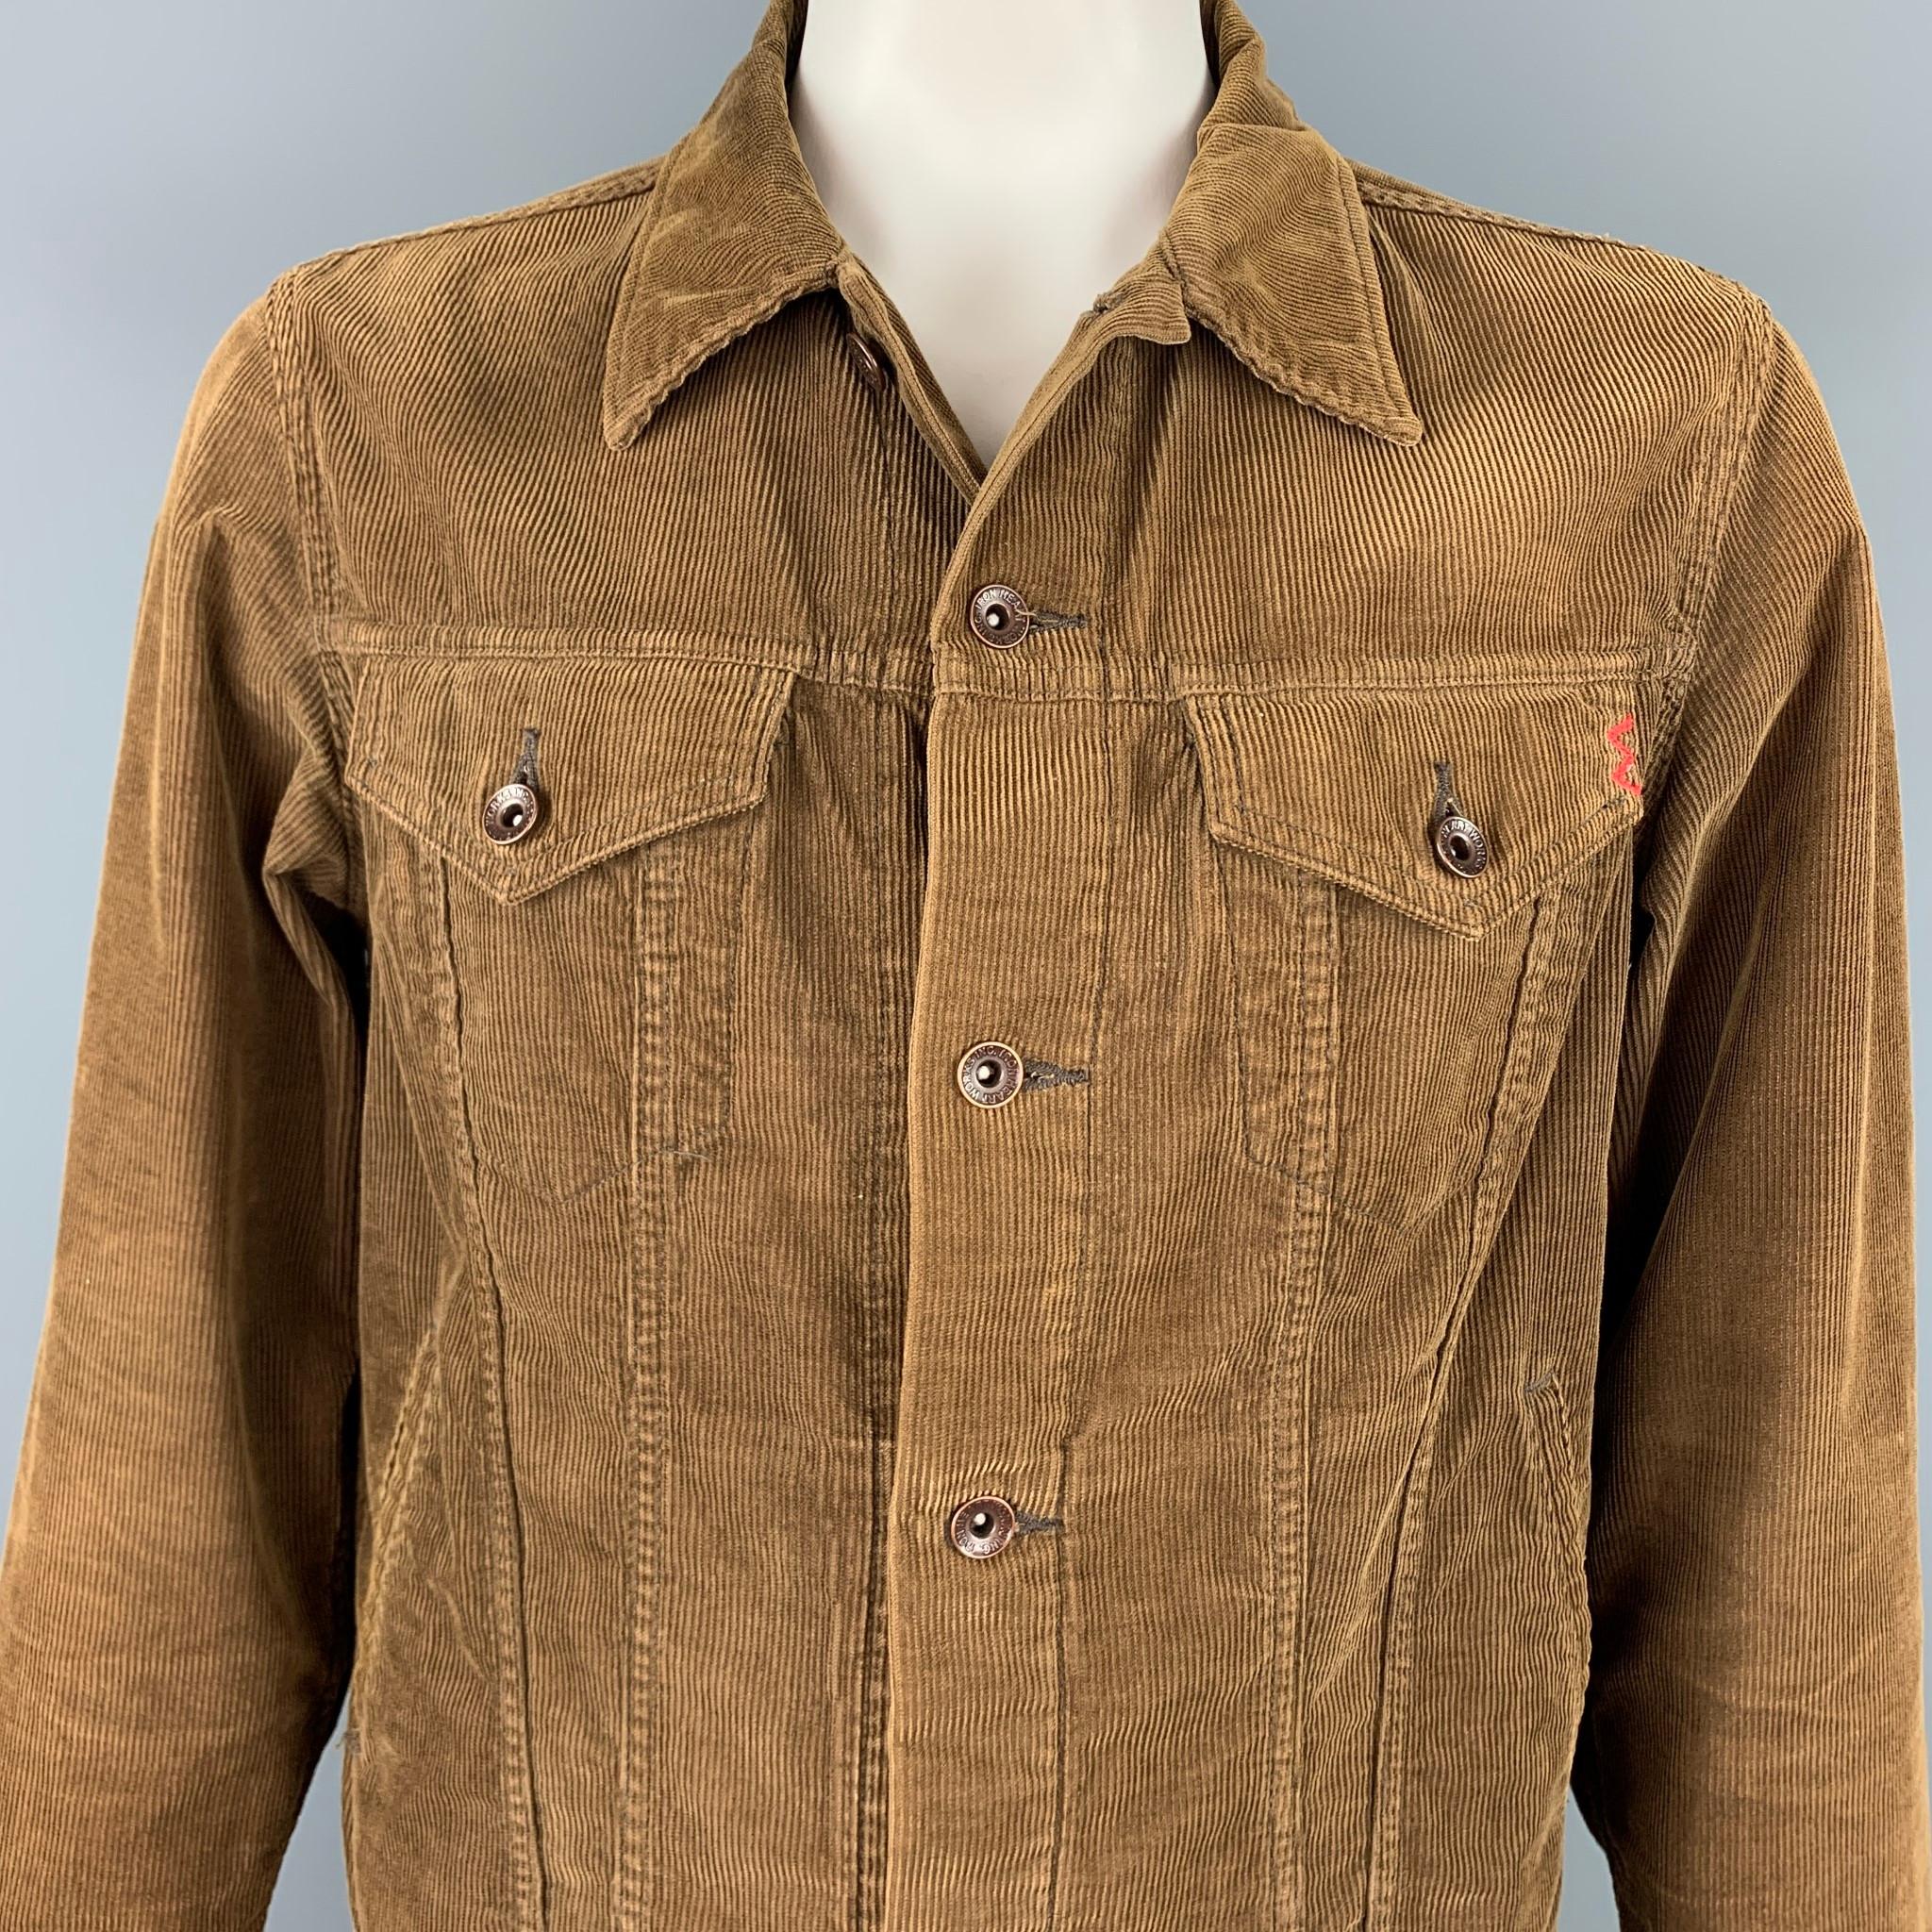 IRON HEART jacket comes in a brown cotton corduroy featuring a trucker style, front pockets, spread collar, an a tack button closure. Made in Japan.

Very Good Pre-Owned Condition.
Marked: 44

Measurements:

Shoulder: 19 in.
Chest: 44 in.
Sleeve: 27